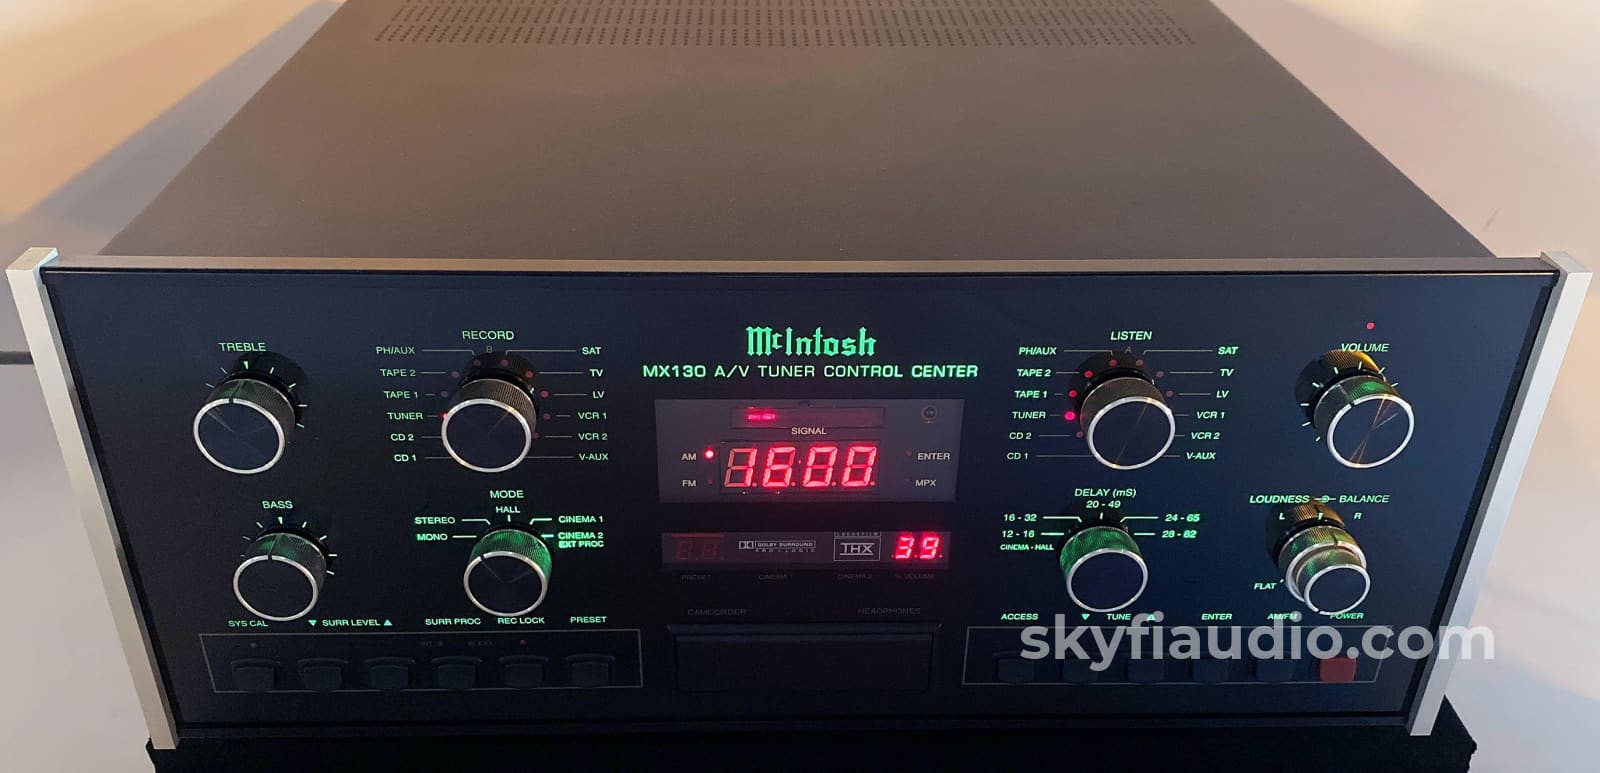 Mcintosh Mx130 Preamp/Processor With Tuner Preamplifier